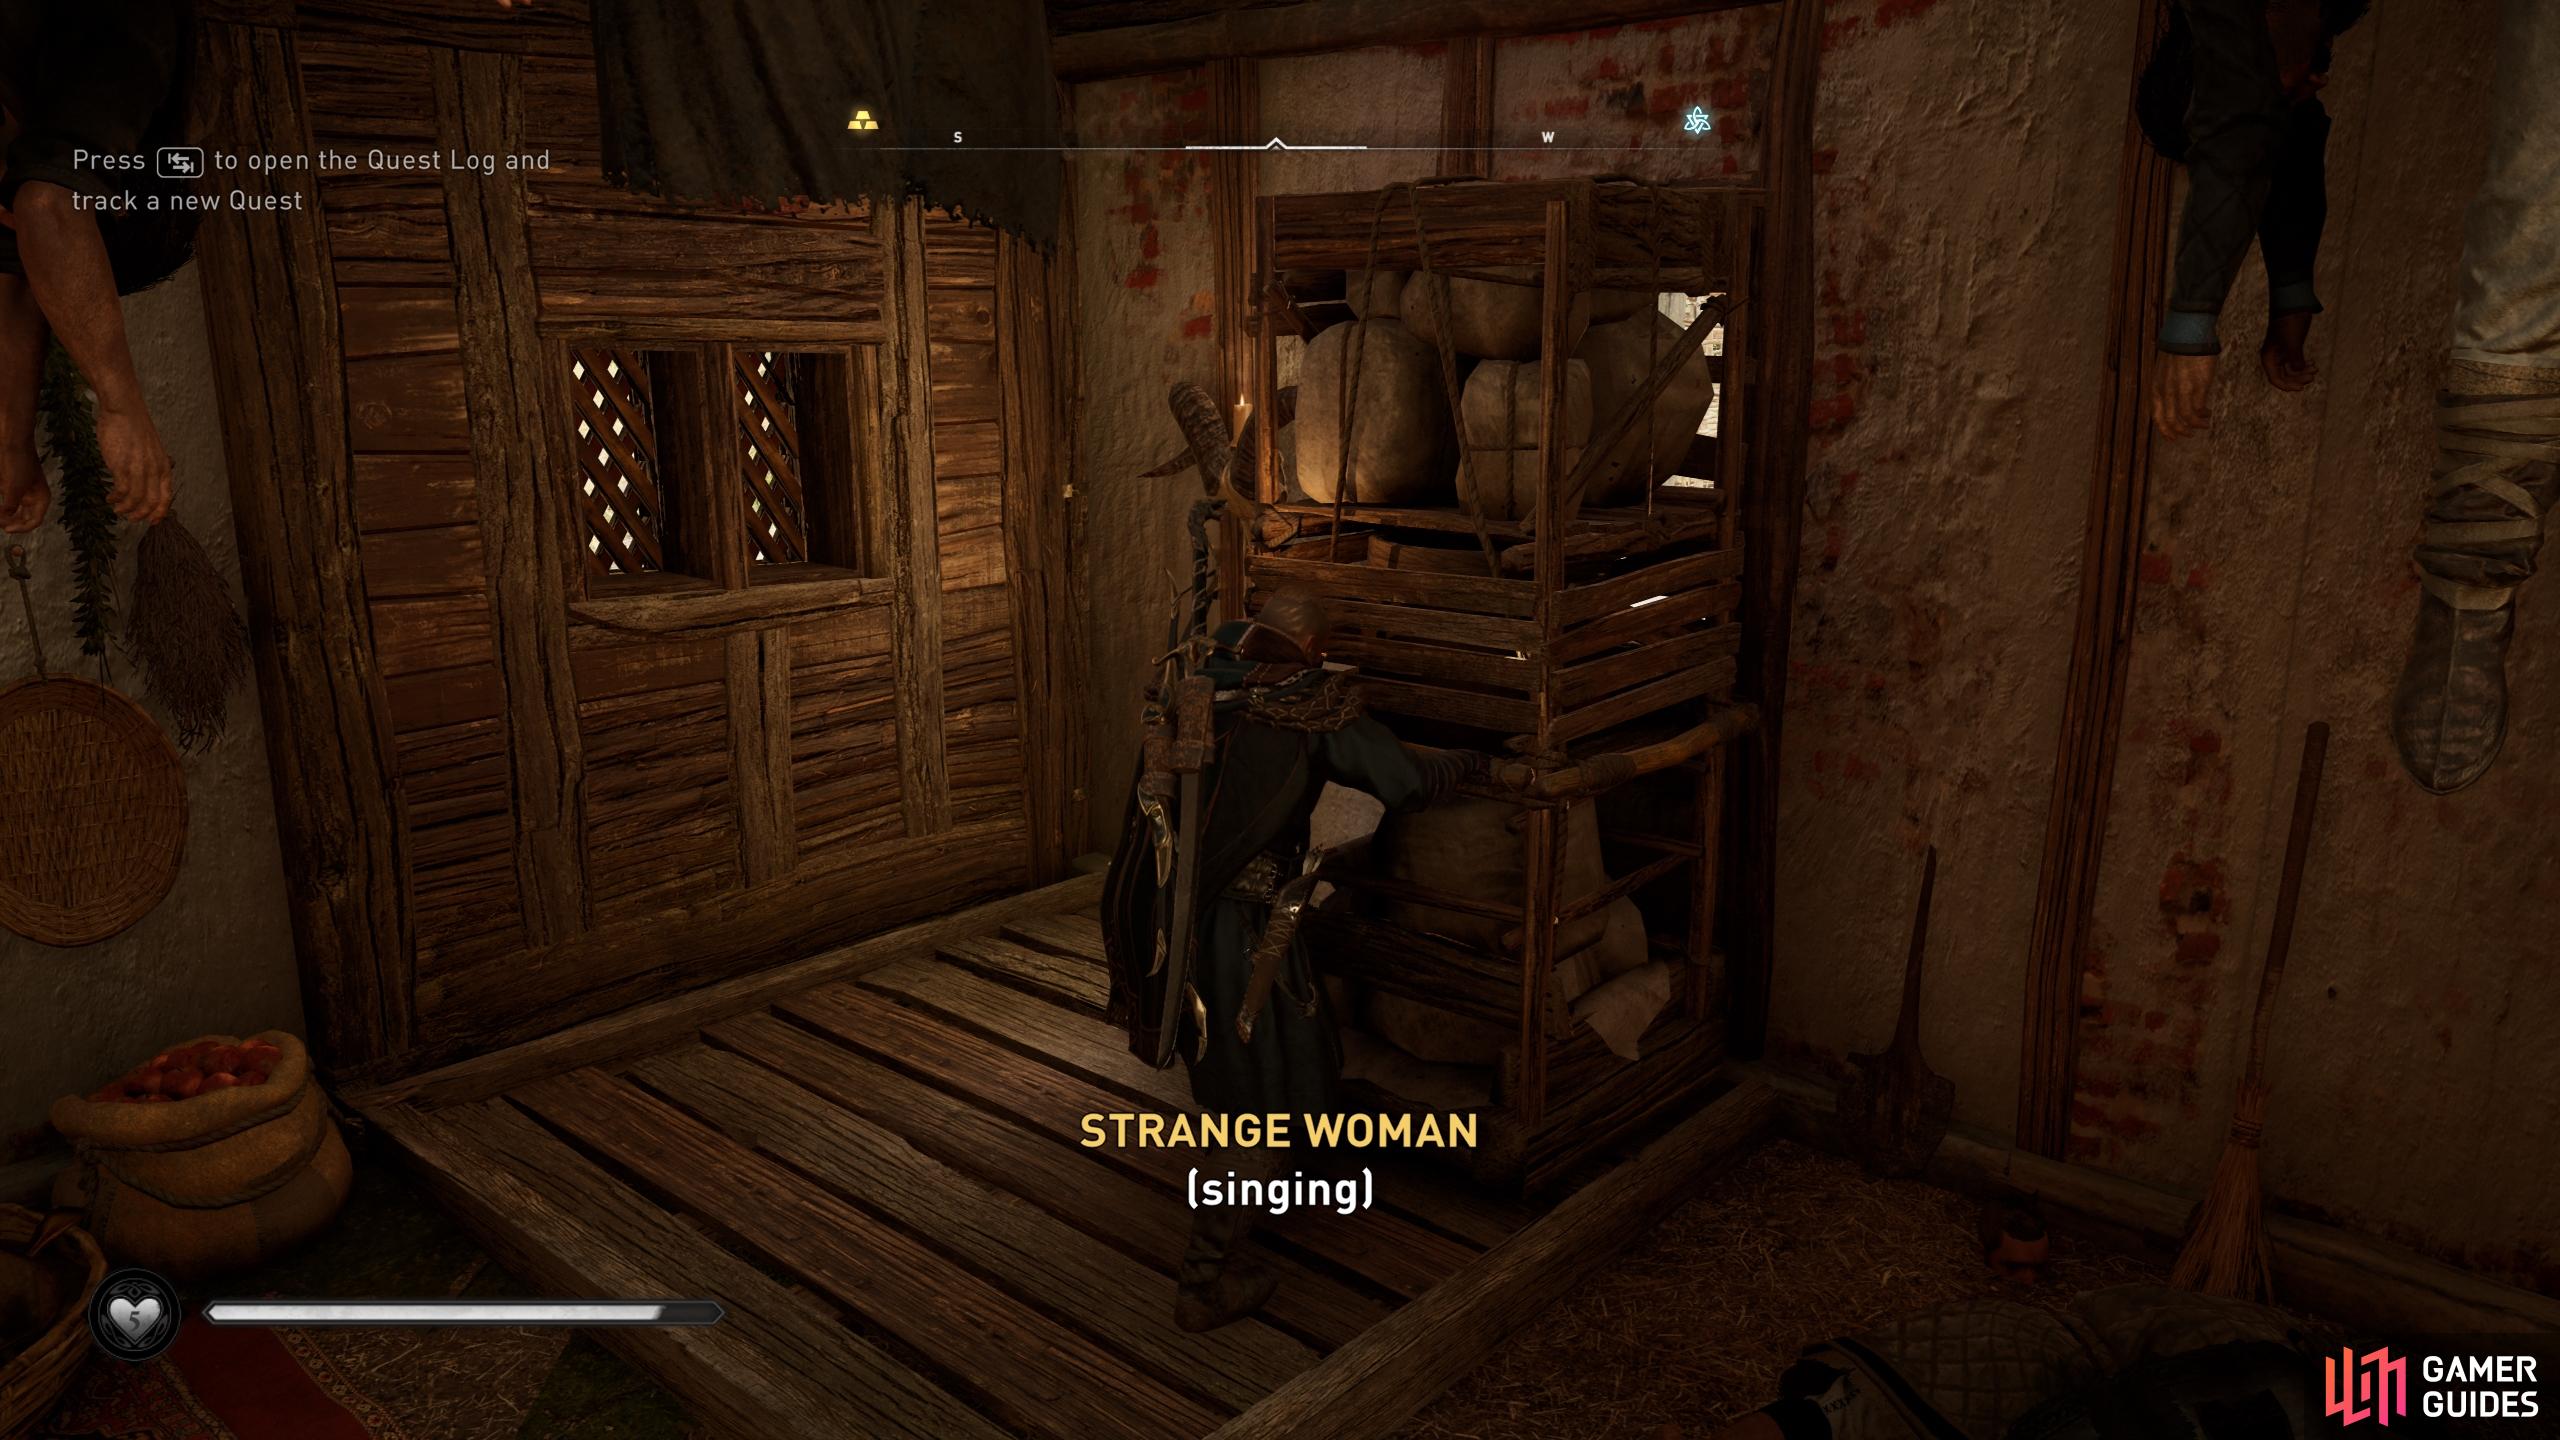 You'll need to move the barricade or climb over the wooden structure to reach the first chest.